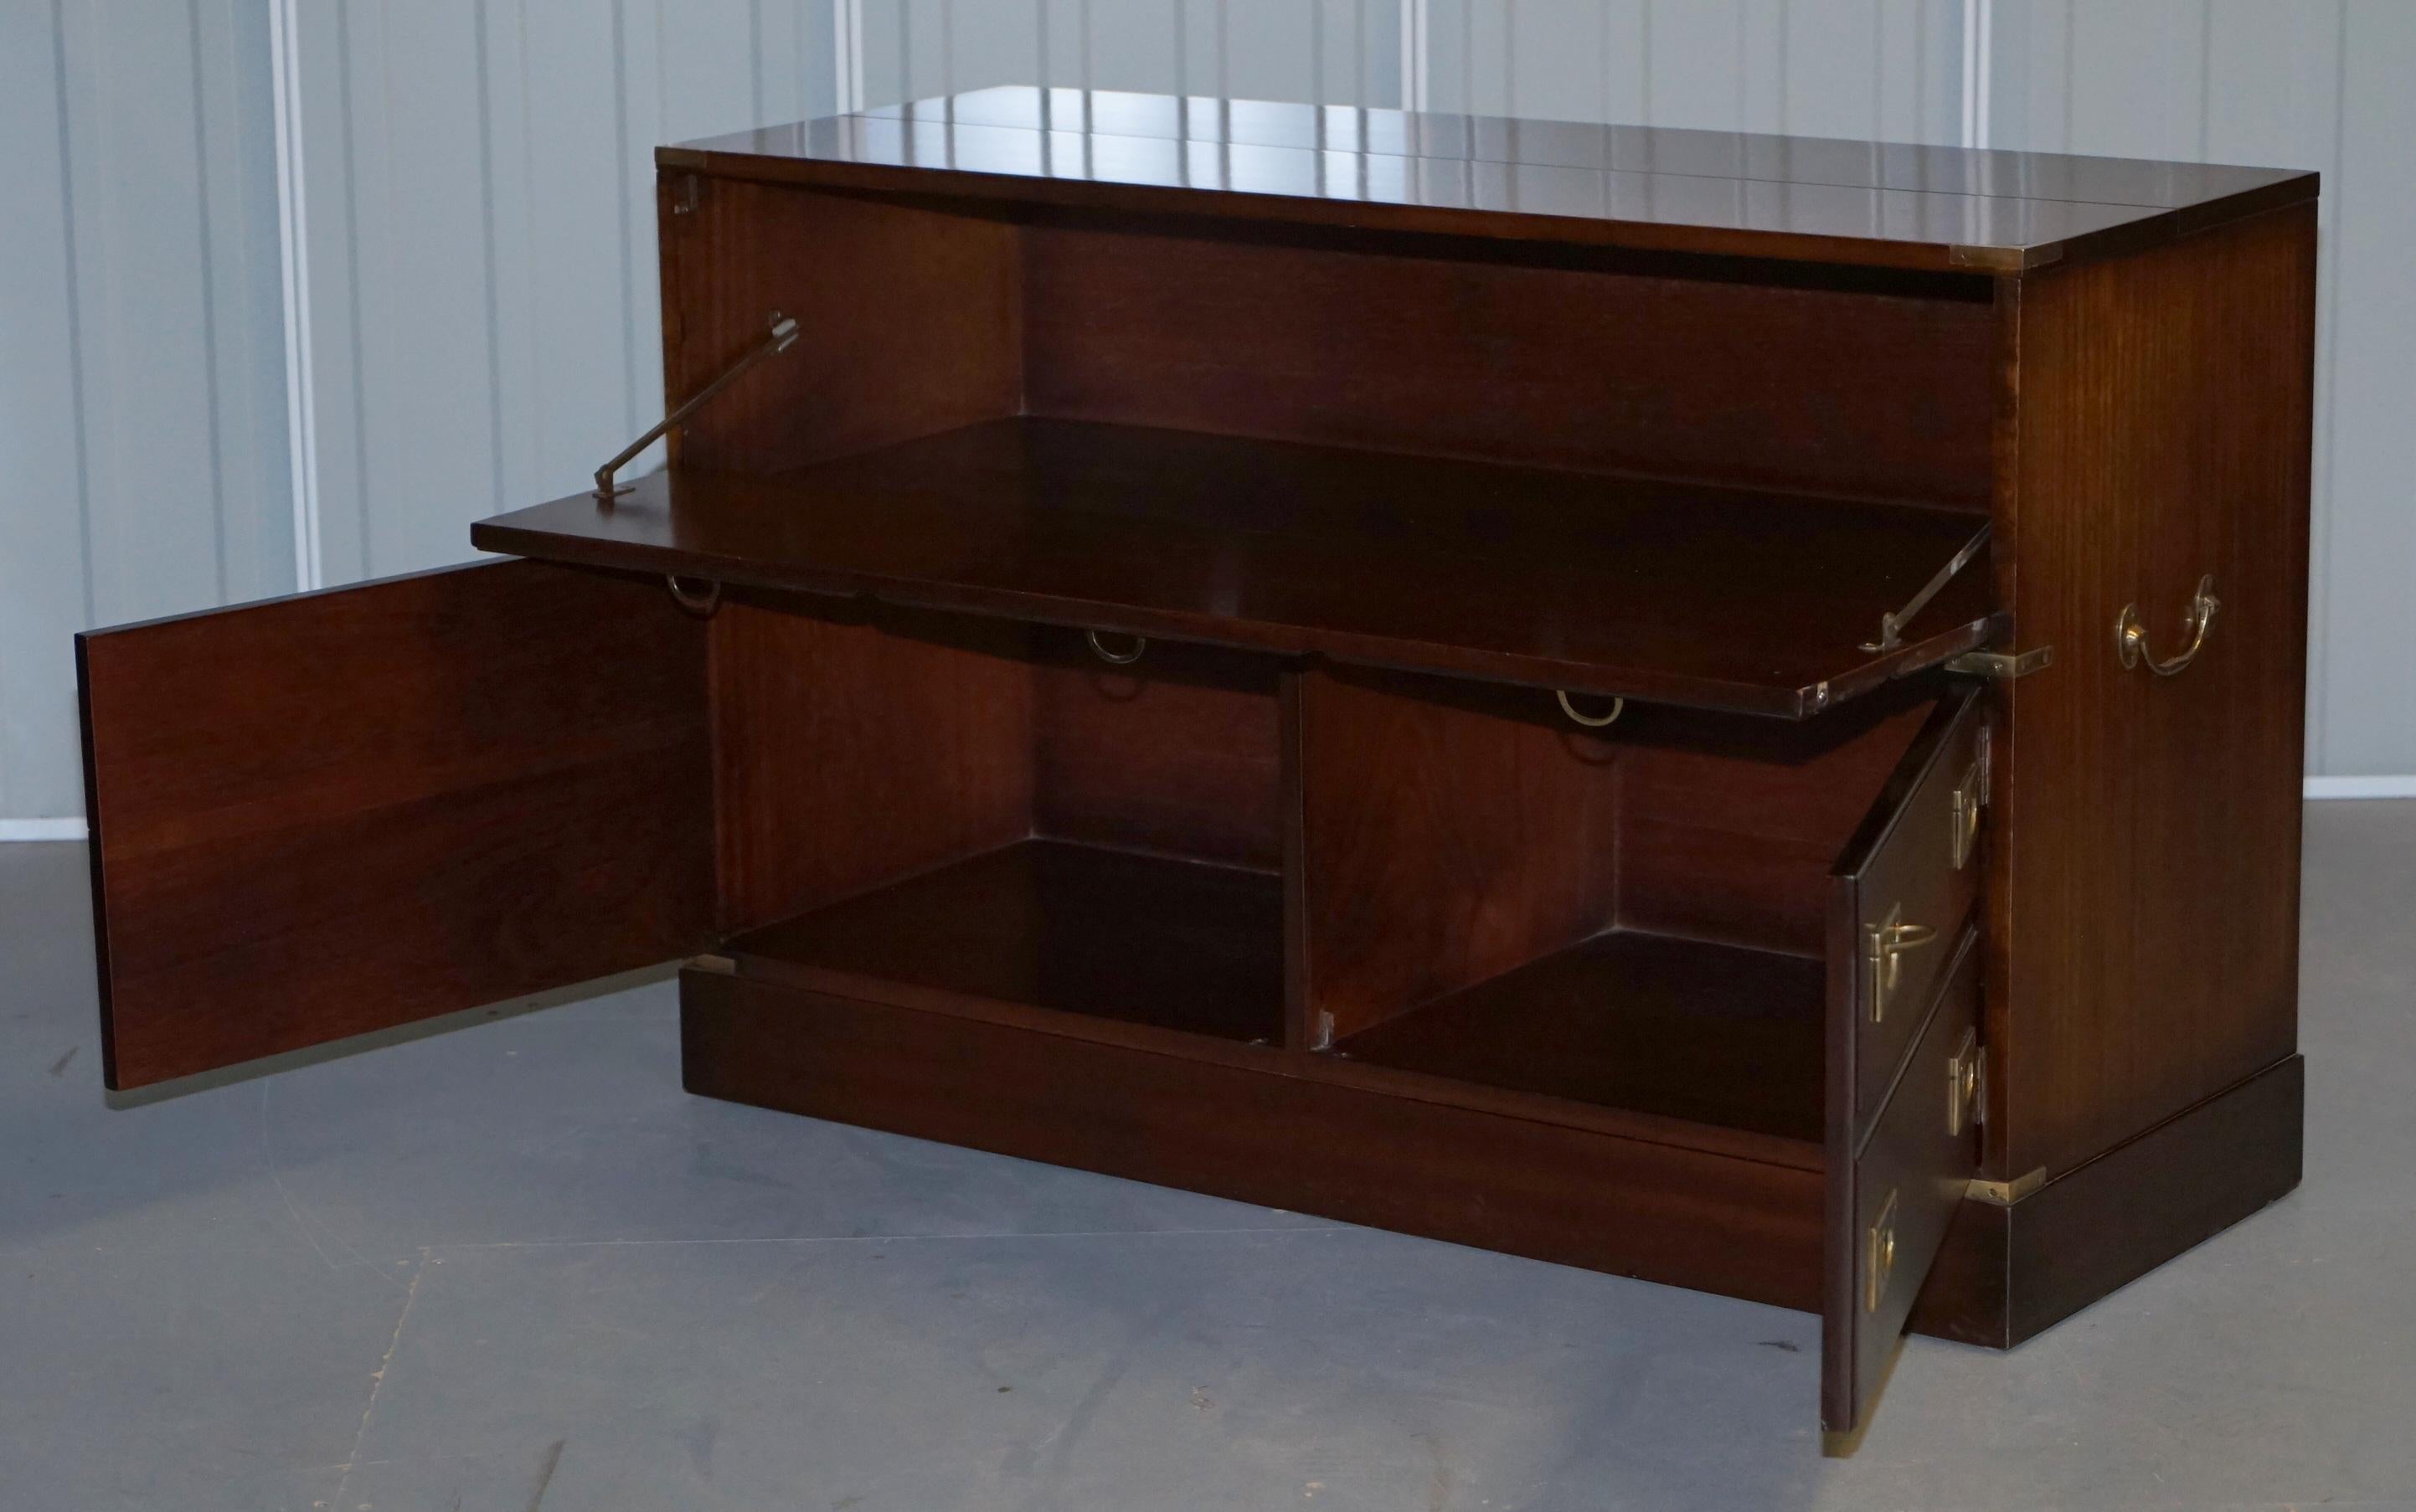 English RECORD PLAYER CABINET HIDDEN INSIDE MILITARY CAMPAIGN CHEST CHEST OF DRAWERs